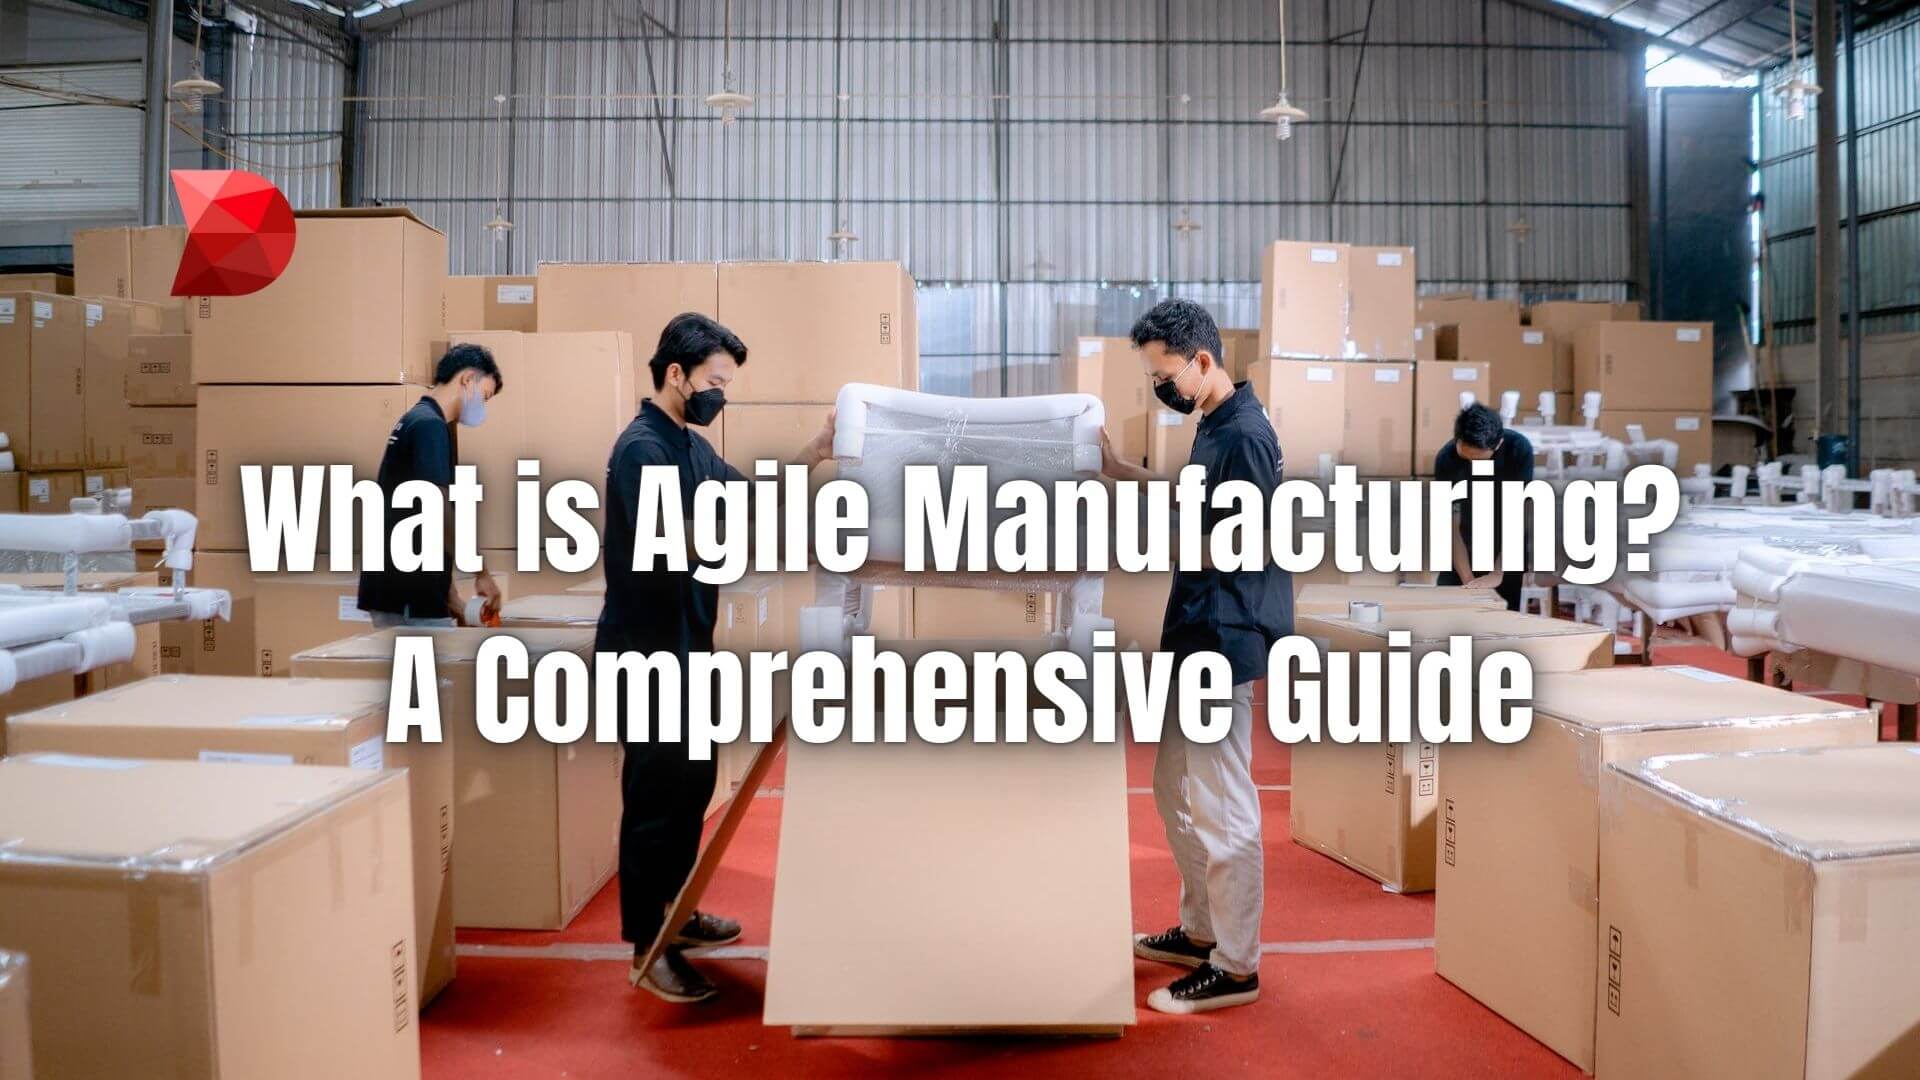 Discover the essence of agile manufacturing with our comprehensive guide. Click here to learn key principles and implementation strategies.